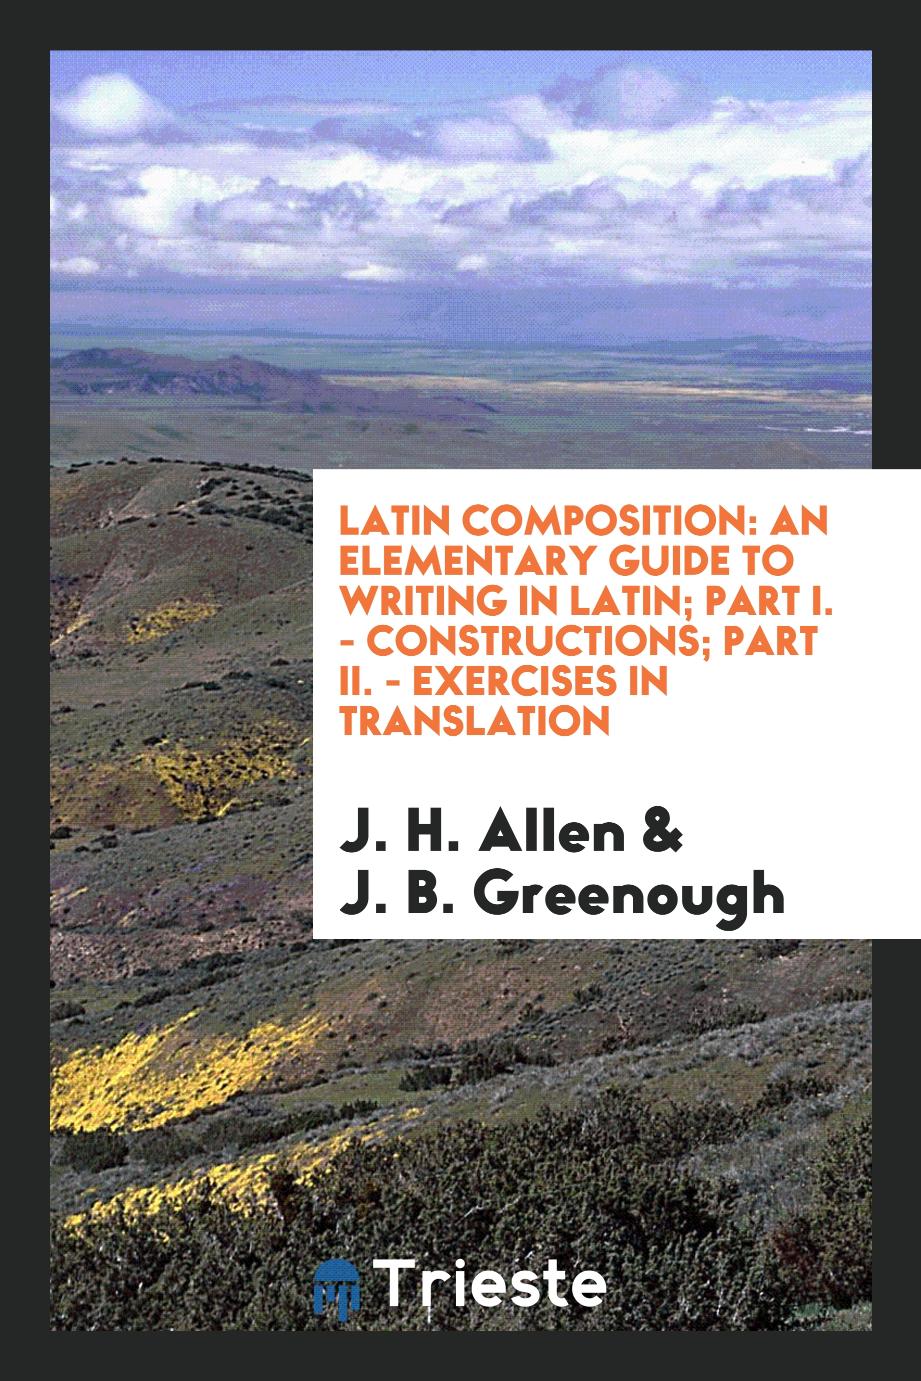 Latin composition: An elementary guide to writing in Latin; part I. - constructions; part II. - exercises in translation